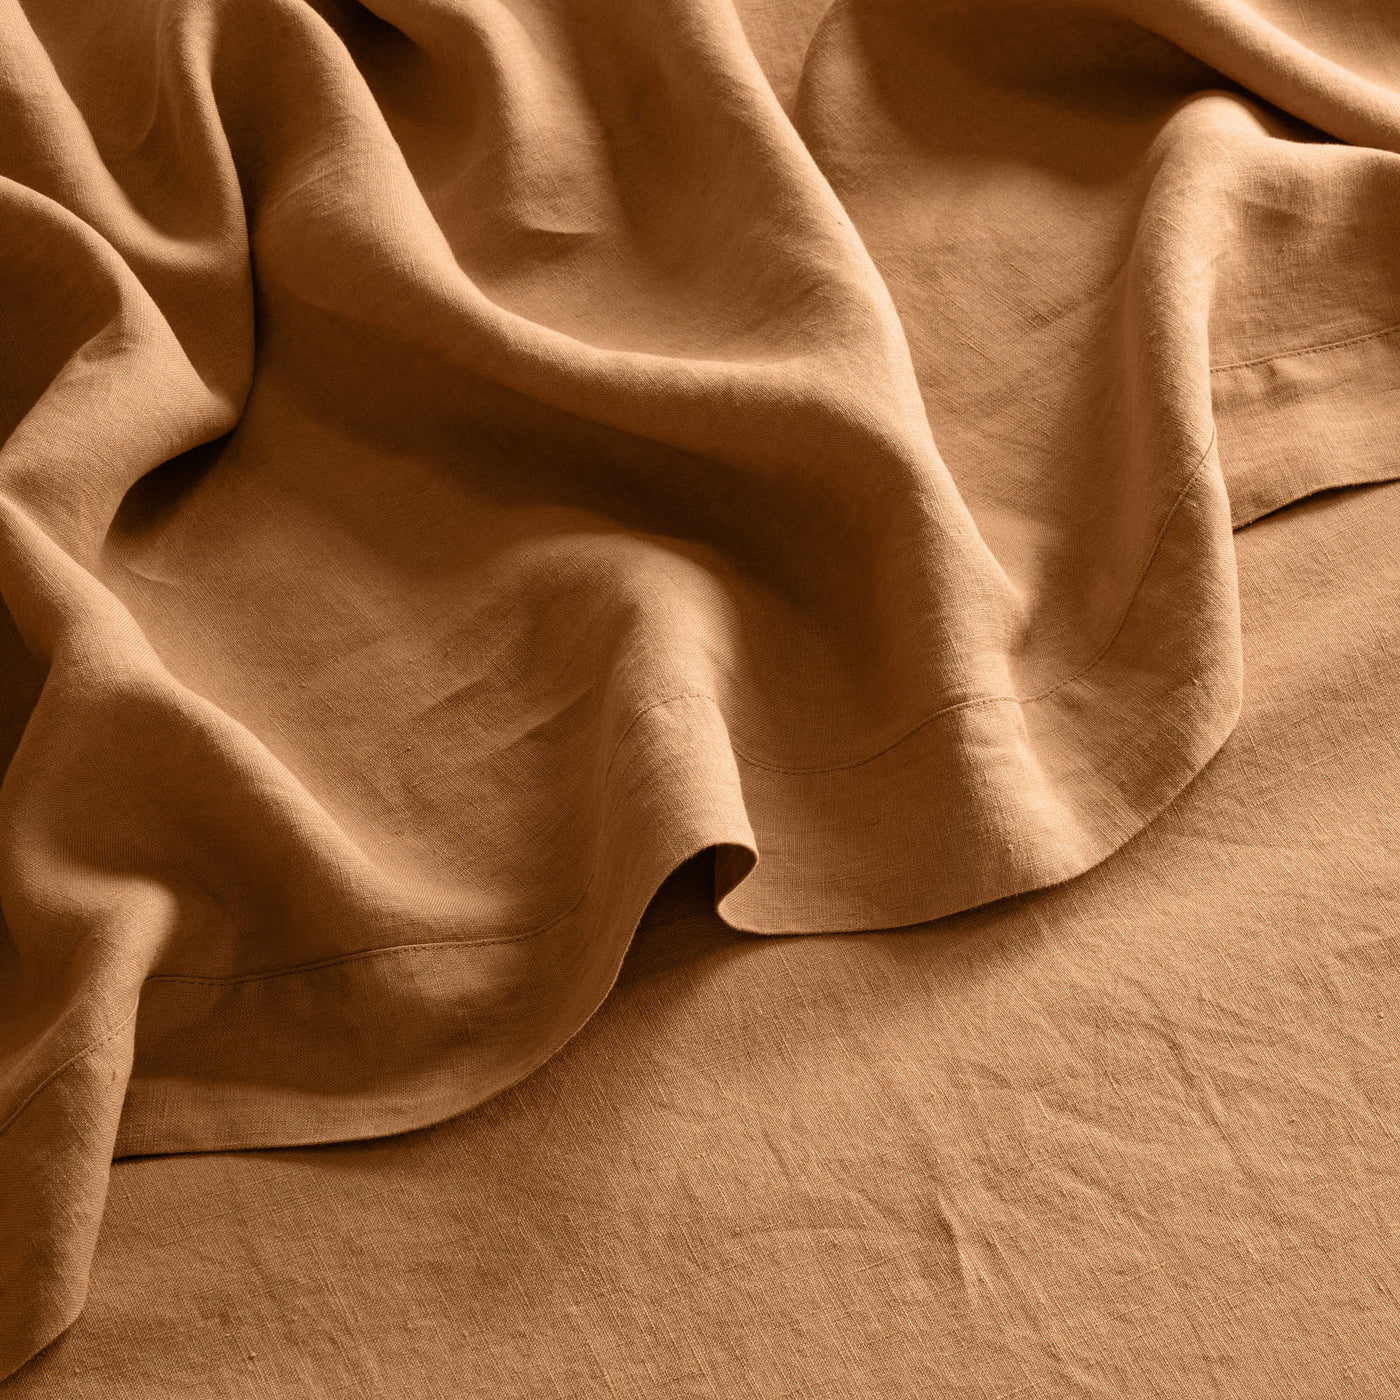 French Flax Linen Flat Sheet in Sandalwood